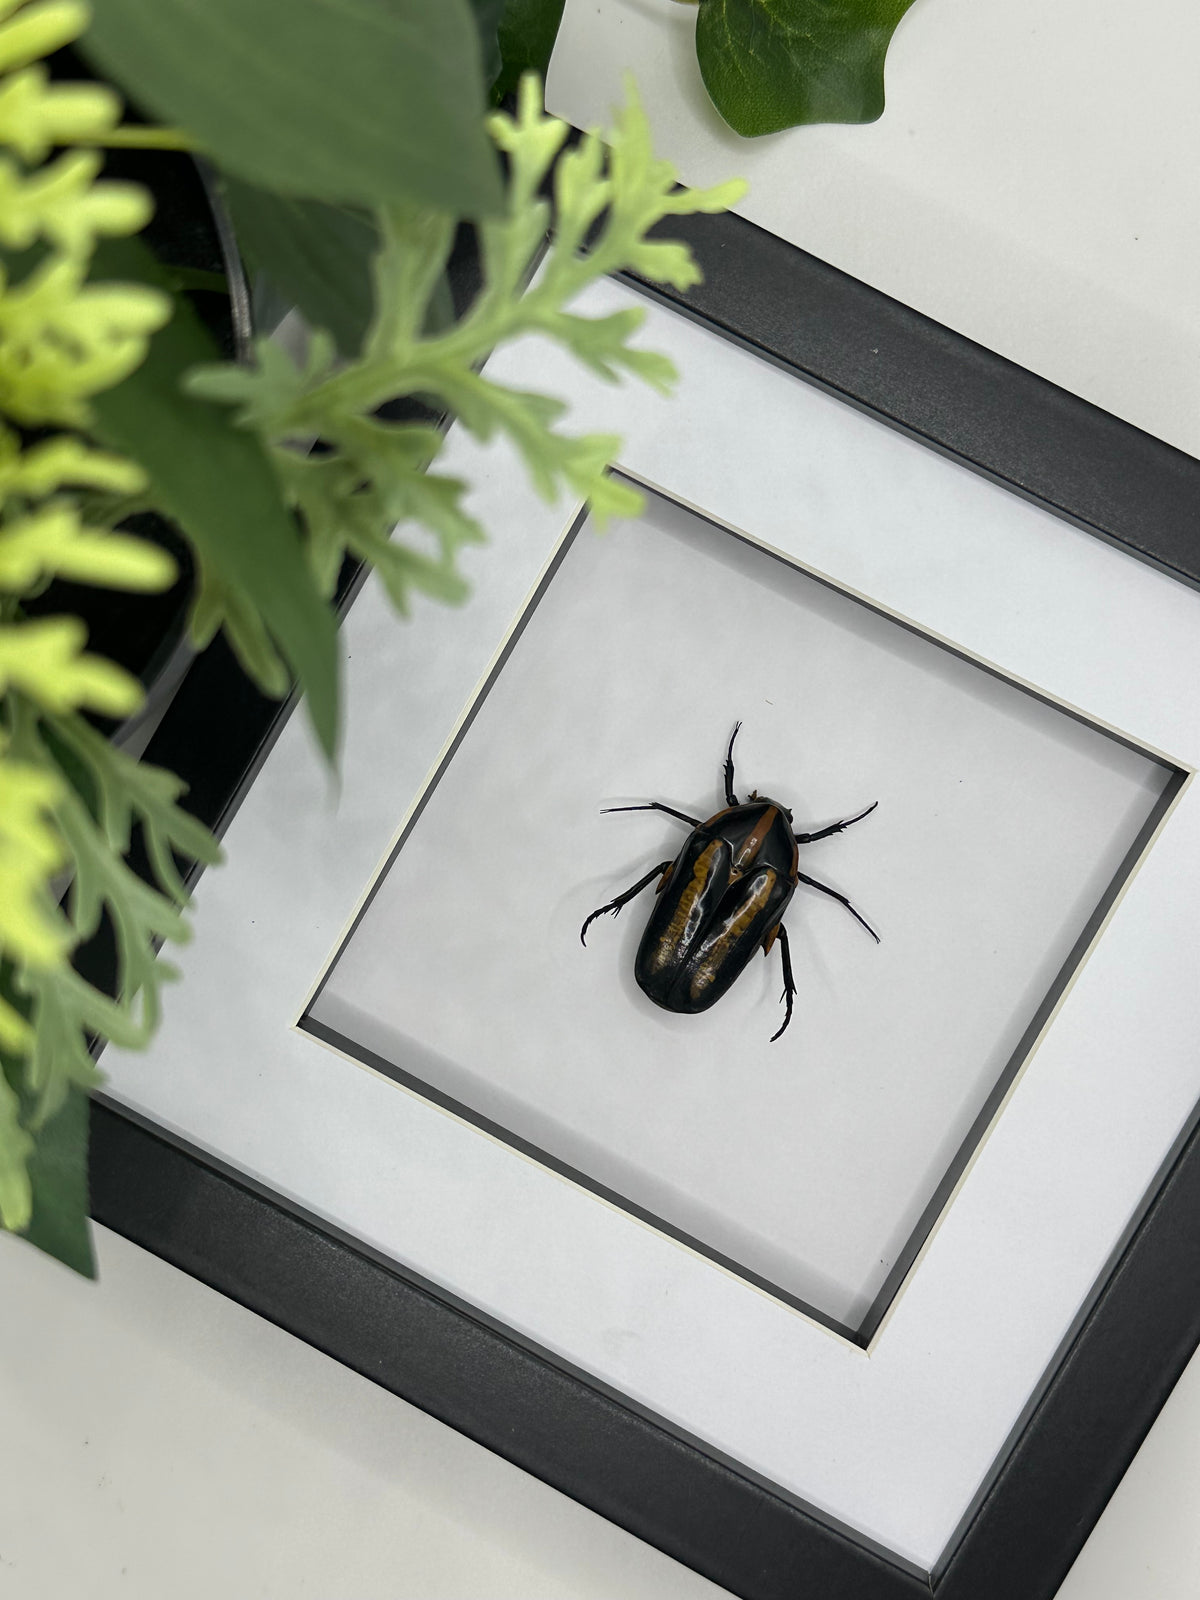 Flower Beetle / Clerota Rigifica in a frame